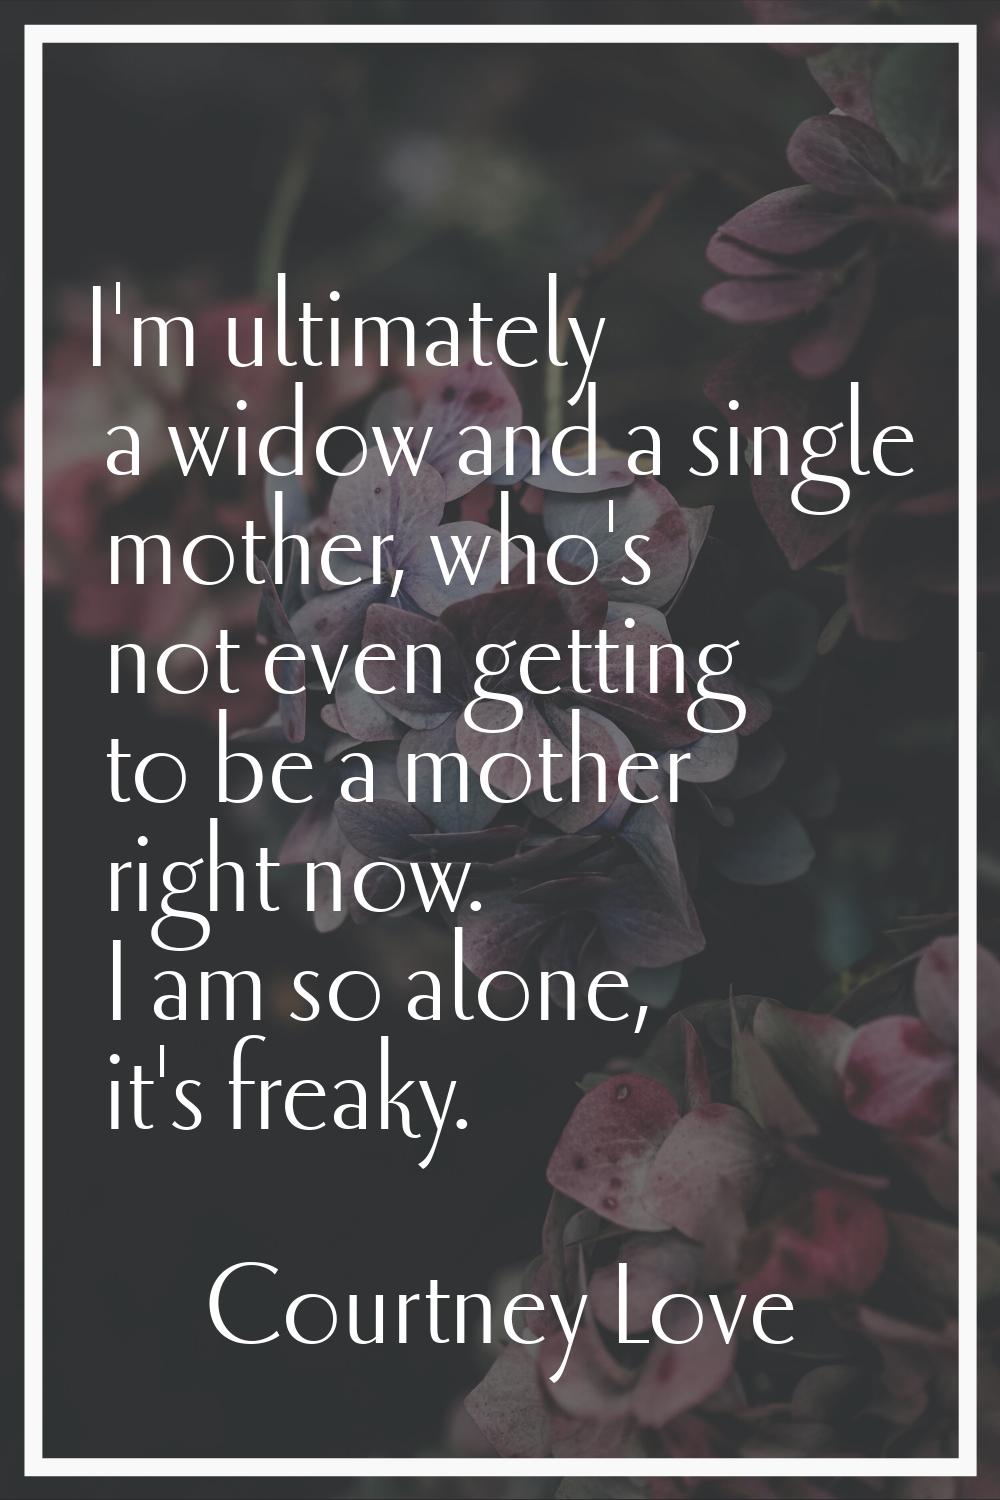 I'm ultimately a widow and a single mother, who's not even getting to be a mother right now. I am s